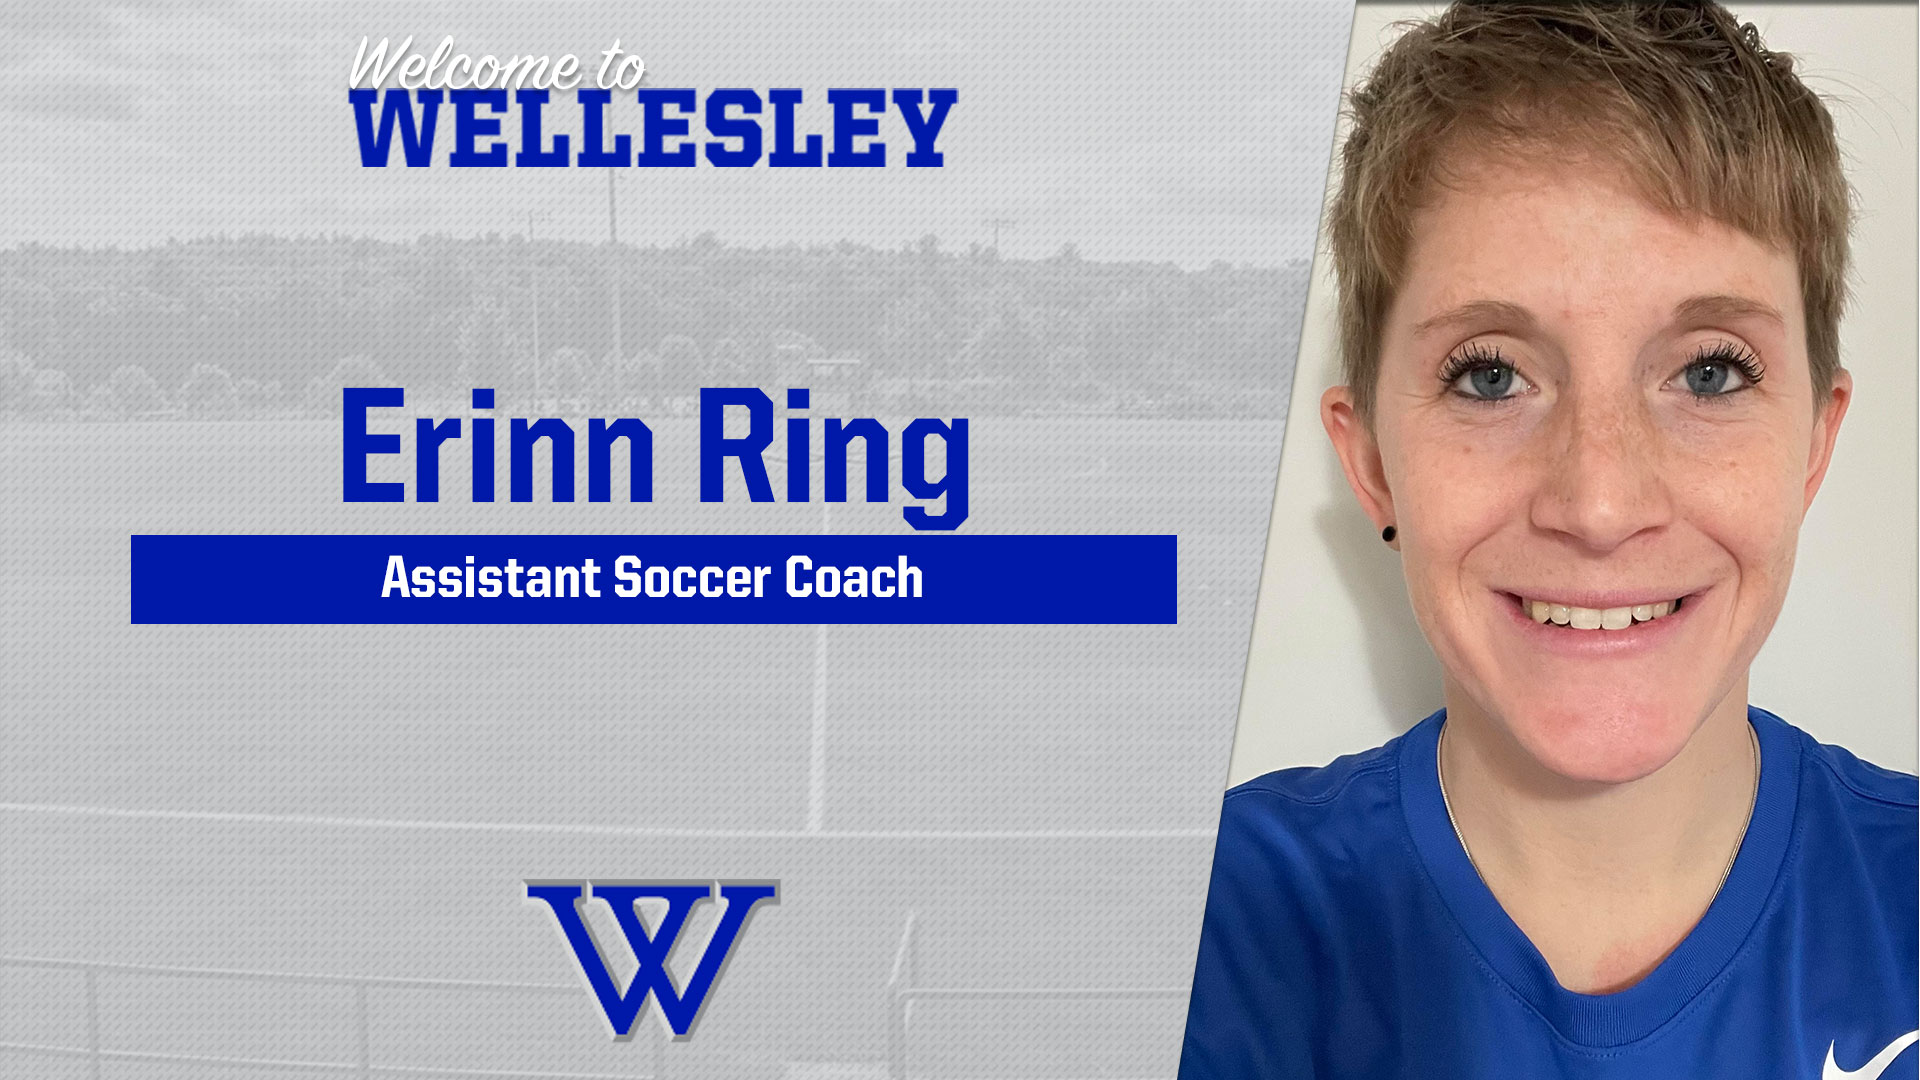 Erinn Ring will join the Blue as an Assistant Soccer Coach